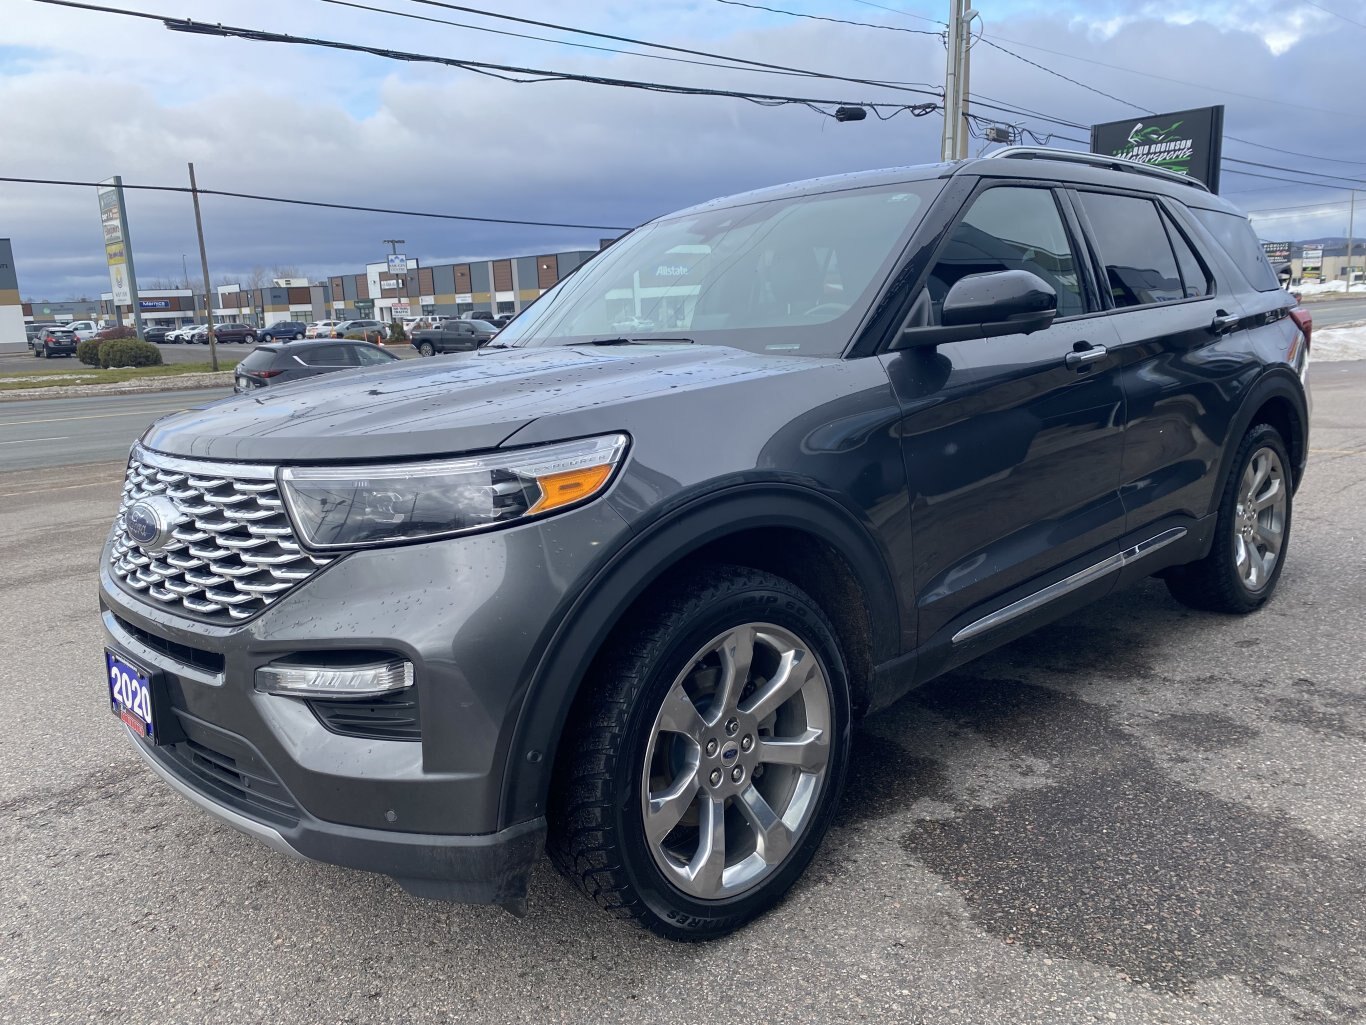 2020 FORD EXPLORER PLATINUM ECOBOOST 4WD 3RD ROW SEATING WITH SUNROOF, LEATHER SEATS, HEATED SEATS, HEATED STEERING WHEEL, REAR VIEW CAMERA, POWER TRUNK, NAVIGATION AND REMOTE START!!